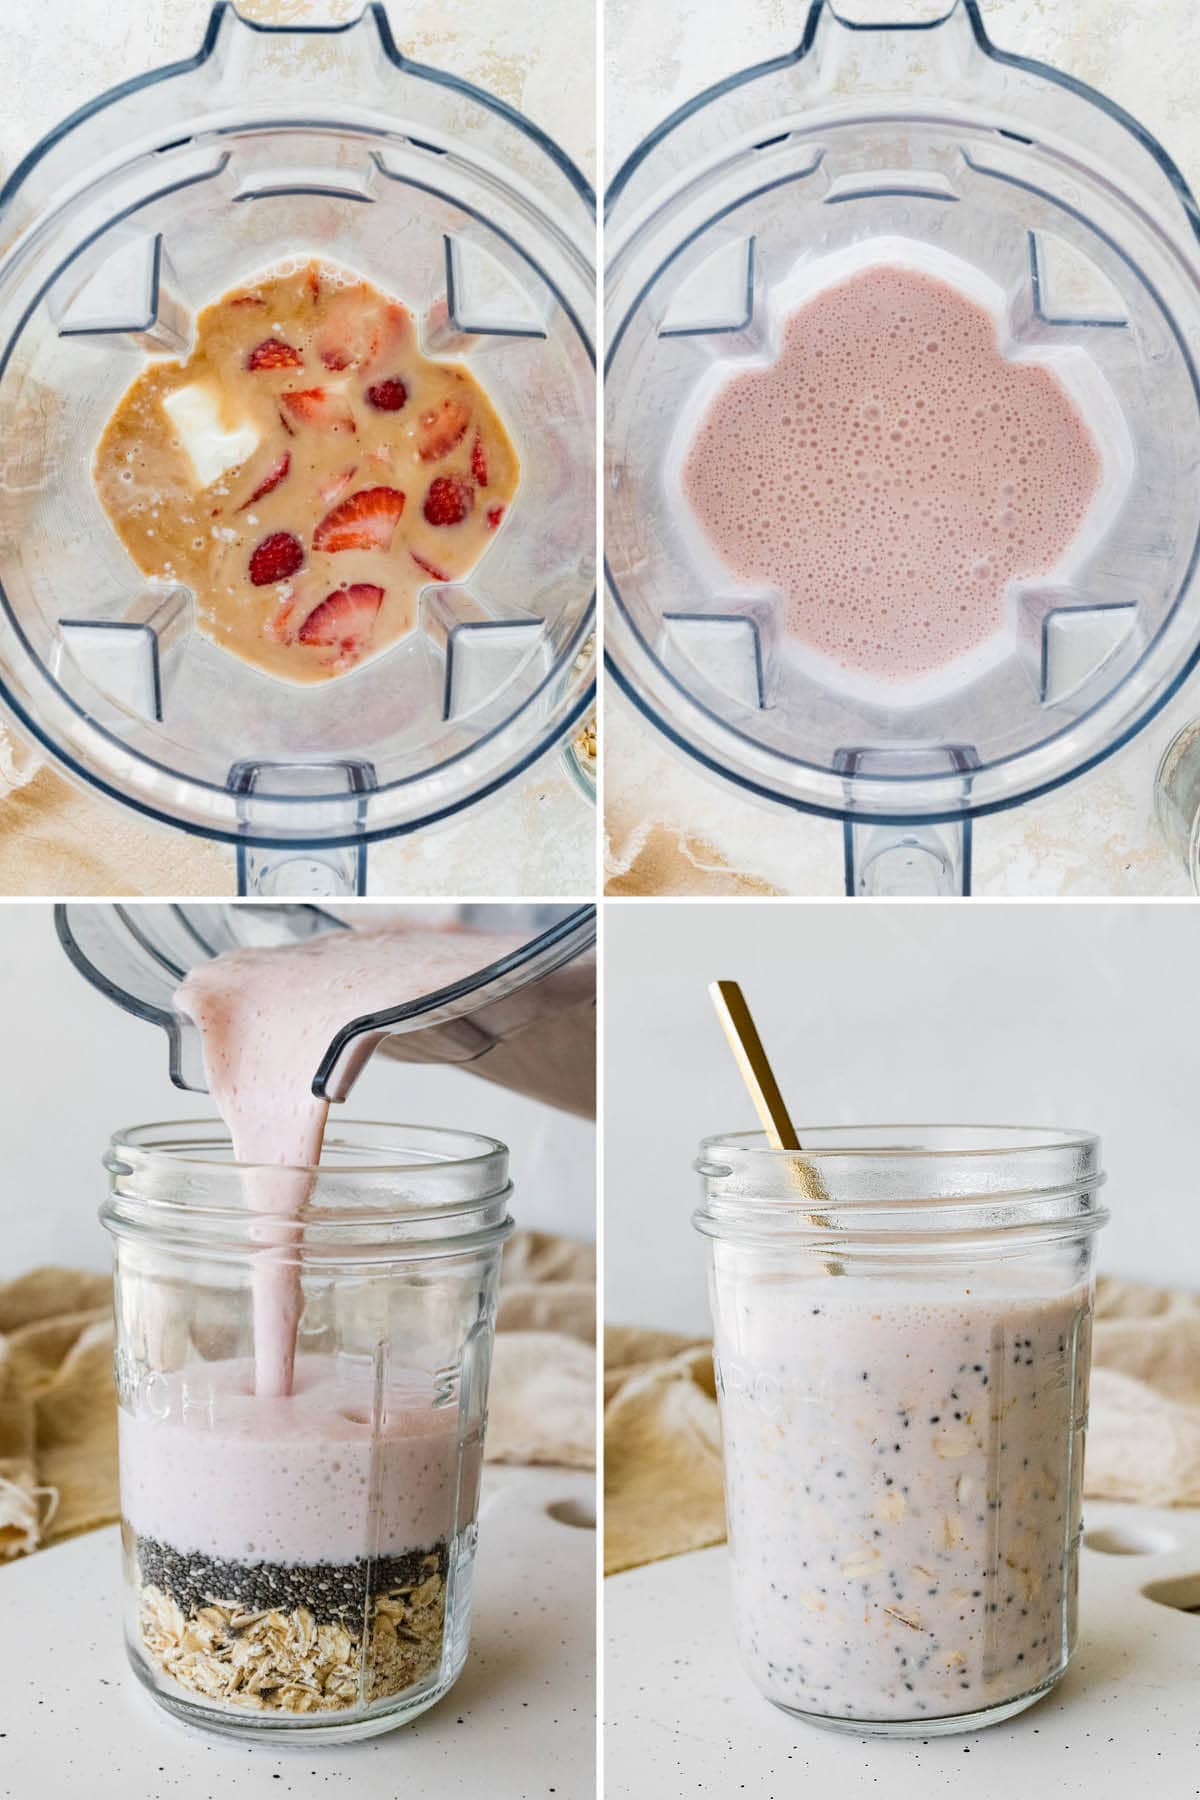 Collage of four photos showing how to make Strawberry Cheesecake Overnight Oats: blending milk, berries and cottage cheese, then mixing with chia seeds and oats in a jar.